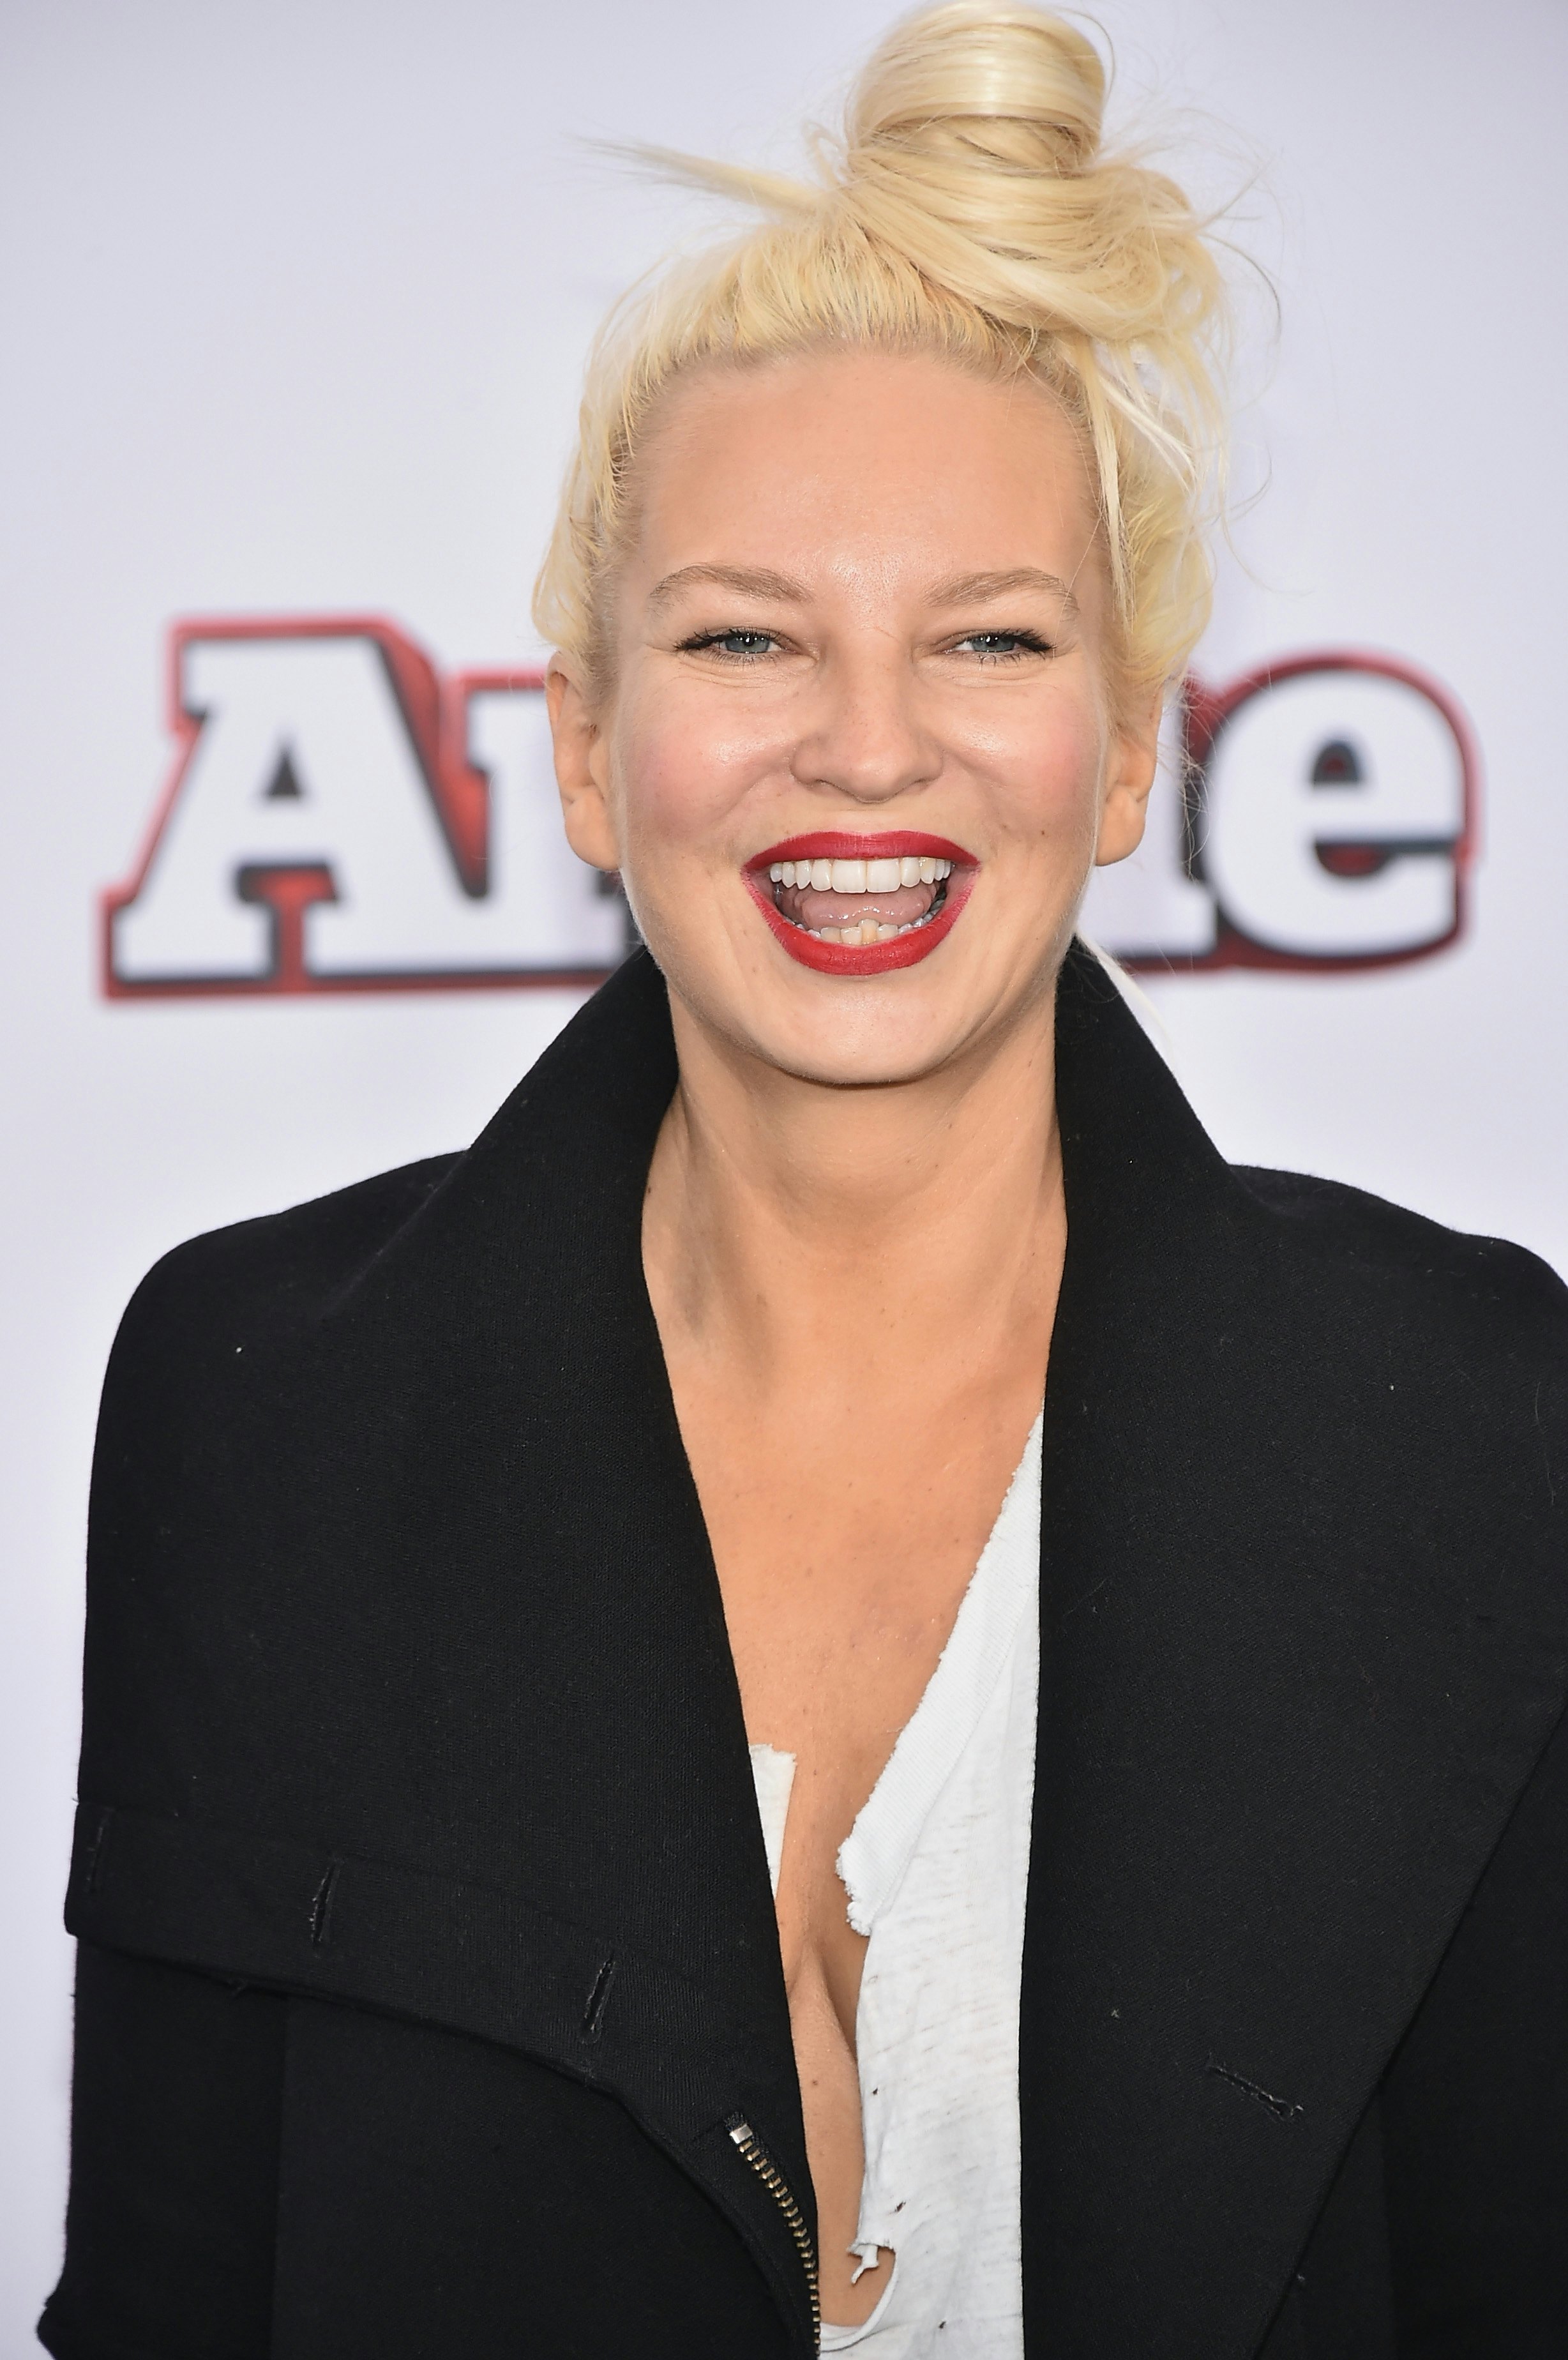 Sia went wigless in this revealing Insta pic - HelloGigglesHelloGiggles